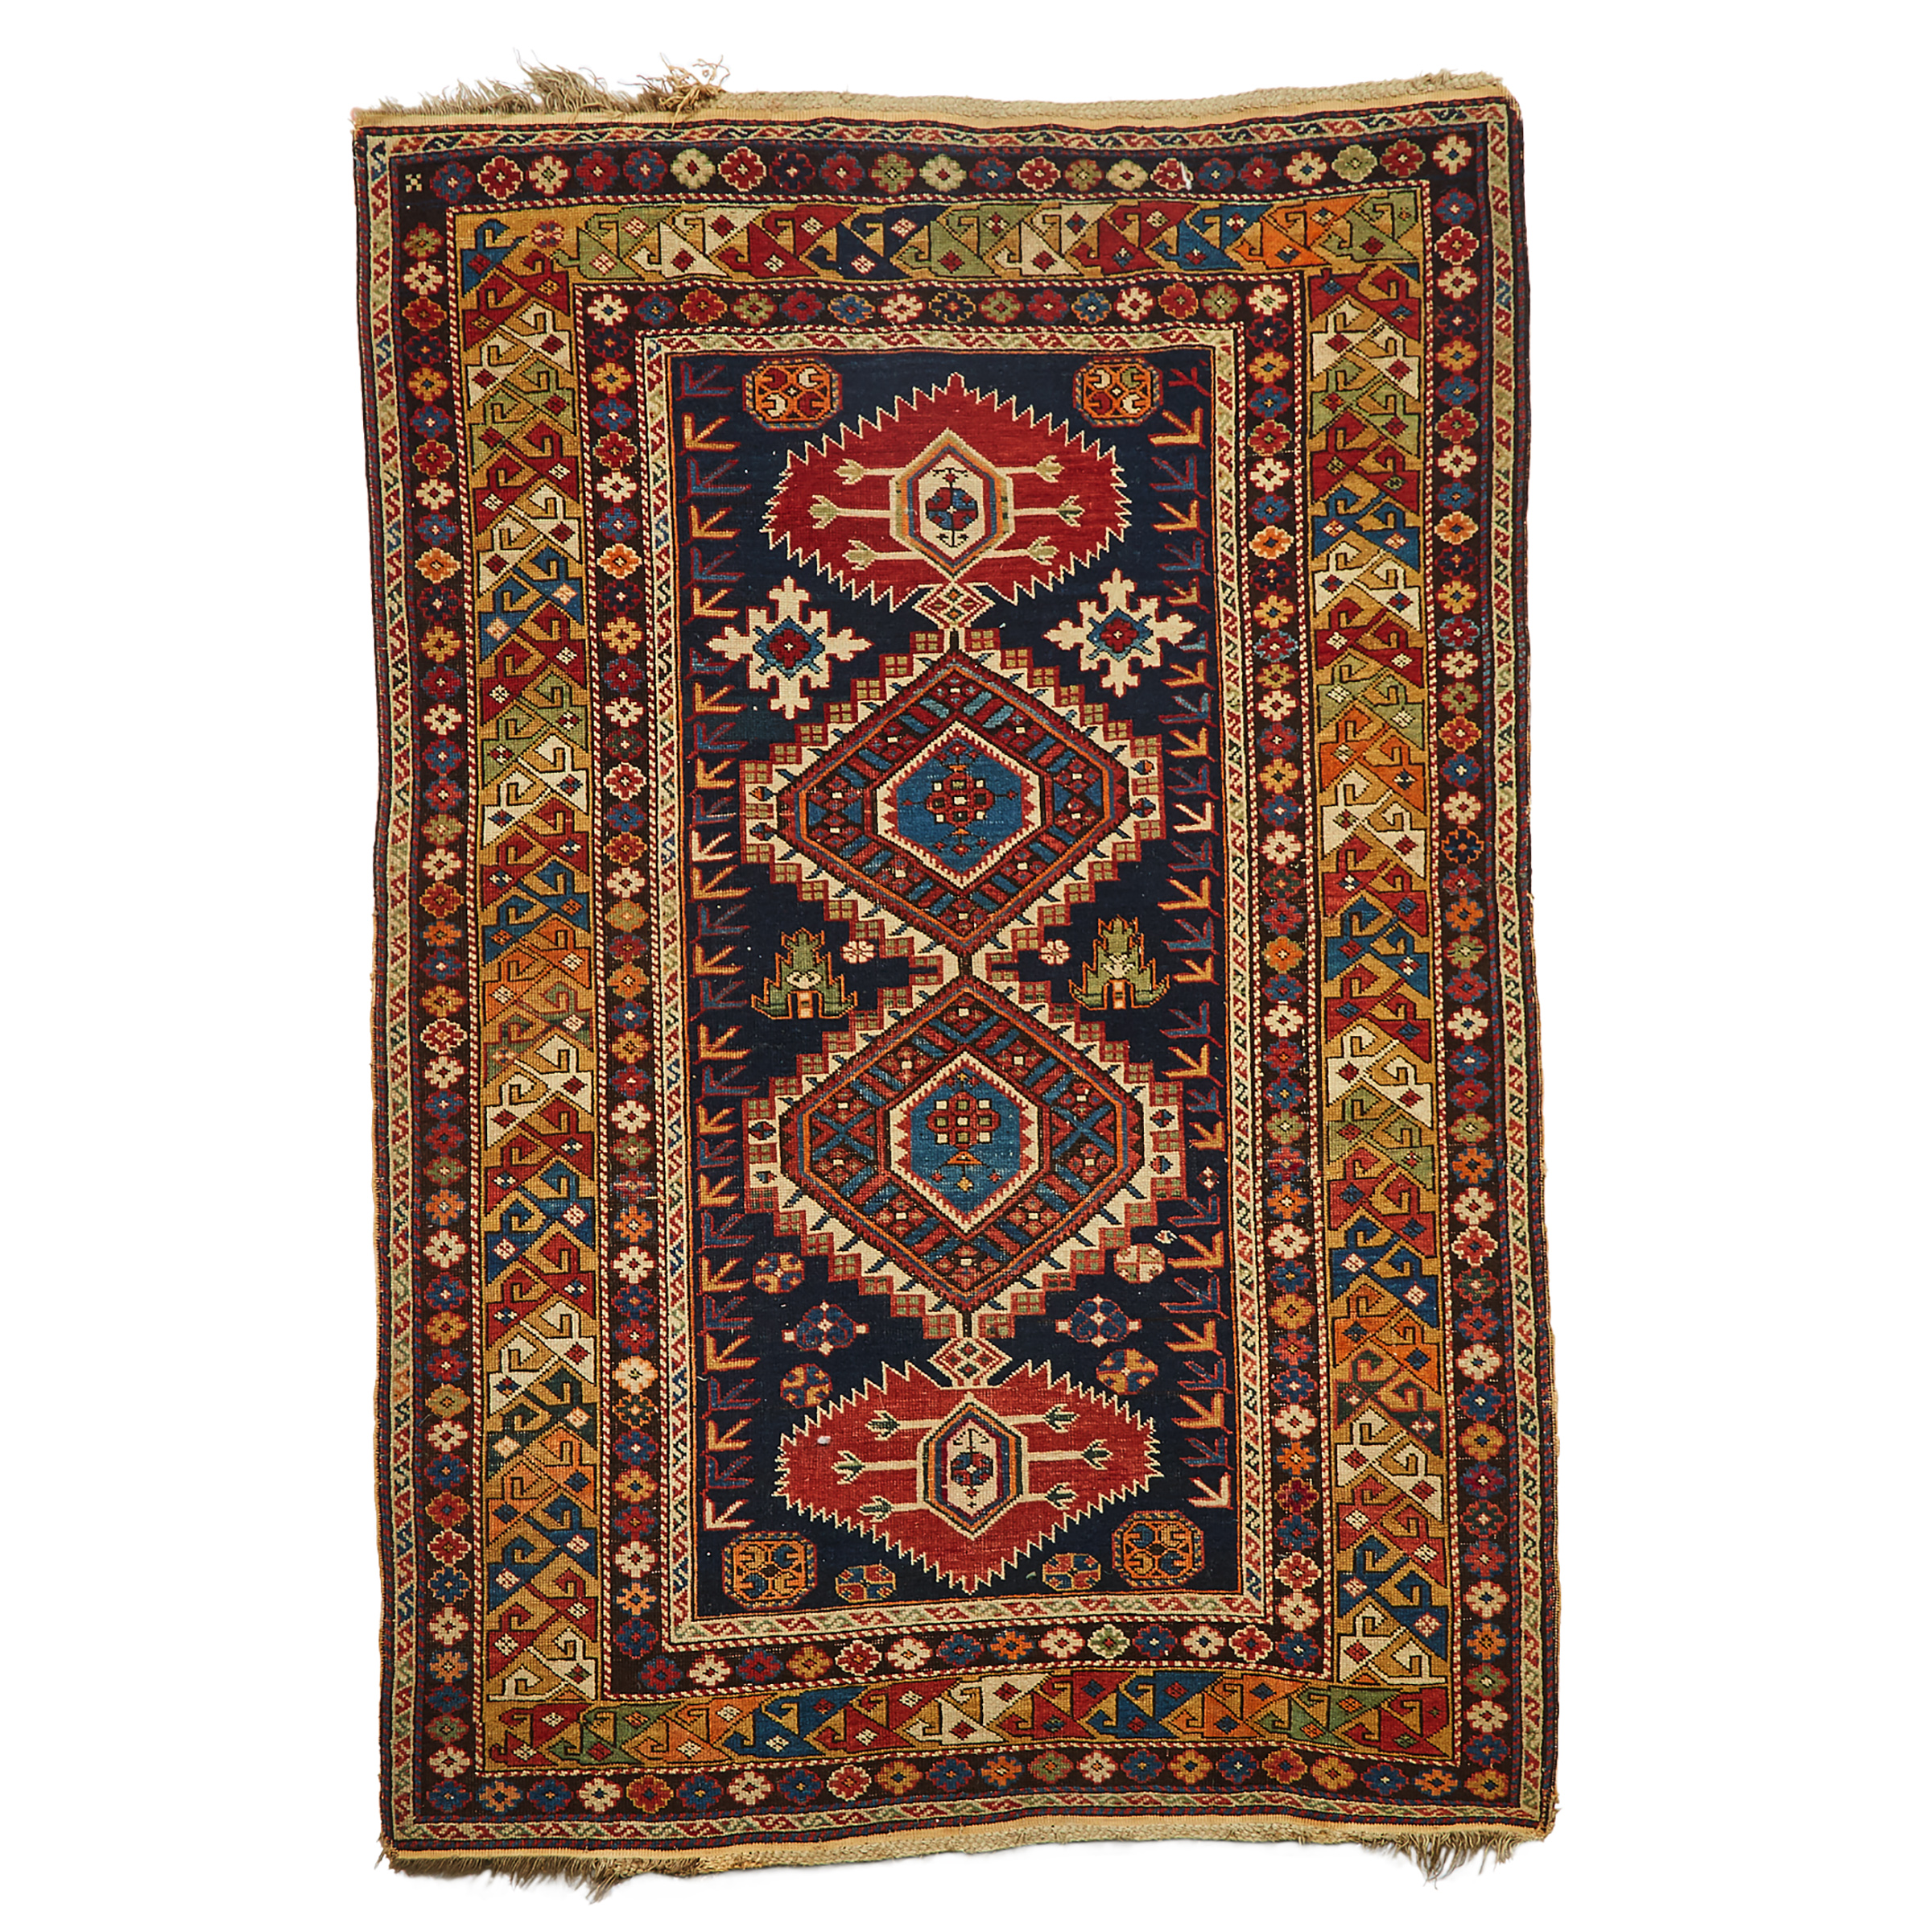 Shirvan Rug, Caucasian, late 19th/ early 20th century